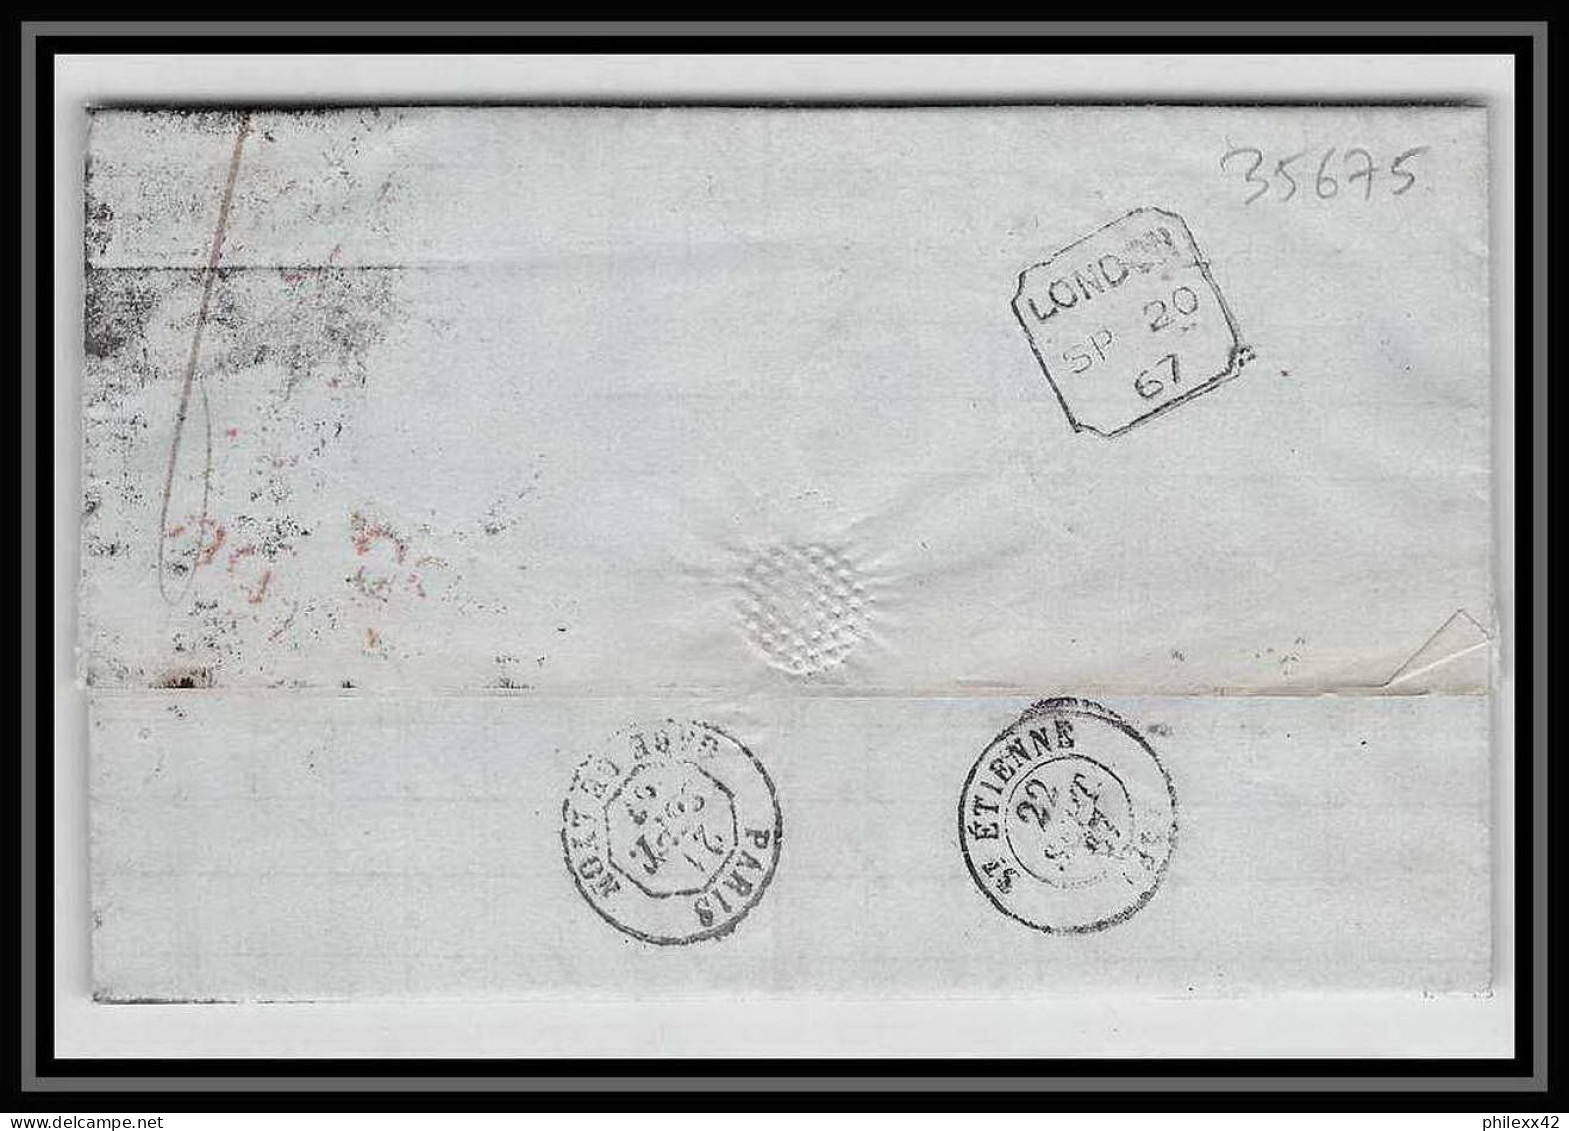 35675 N°32 Victoria 4p Red London St Etienne France 1867 Cachet 48 Lettre Cover Grande Bretagne England - Covers & Documents